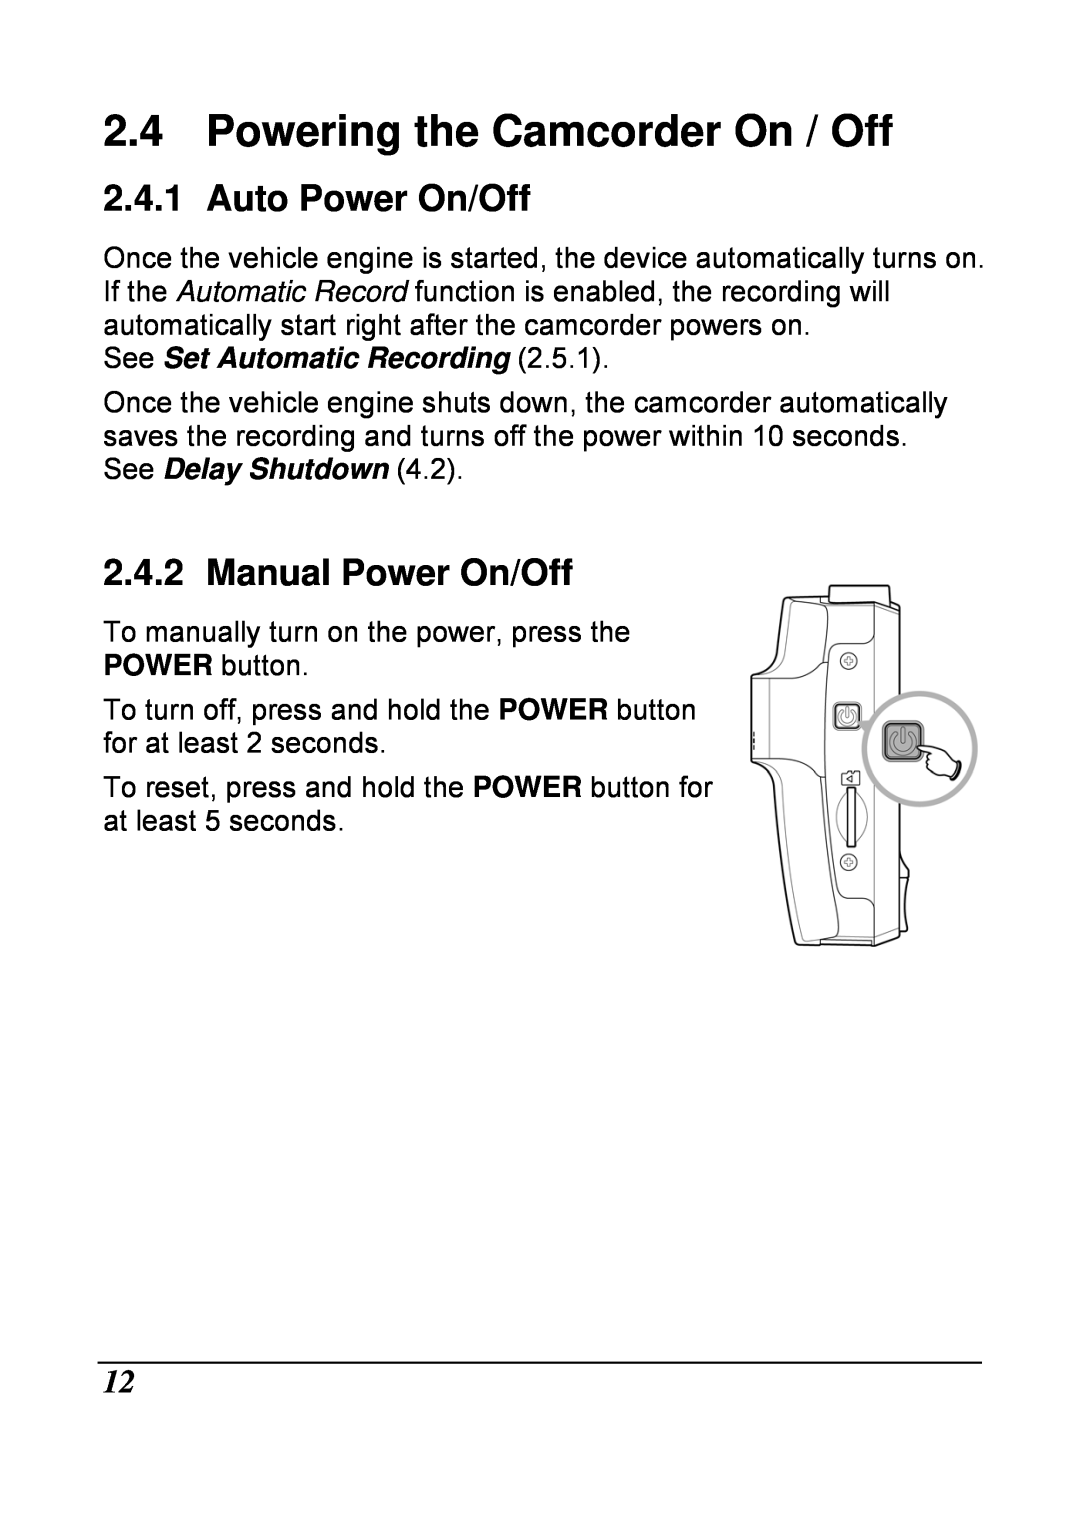 HP f210 Car manual Powering the Camcorder On / Off, Auto Power On/Off, Manual Power On/Off, See Set Automatic Recording 